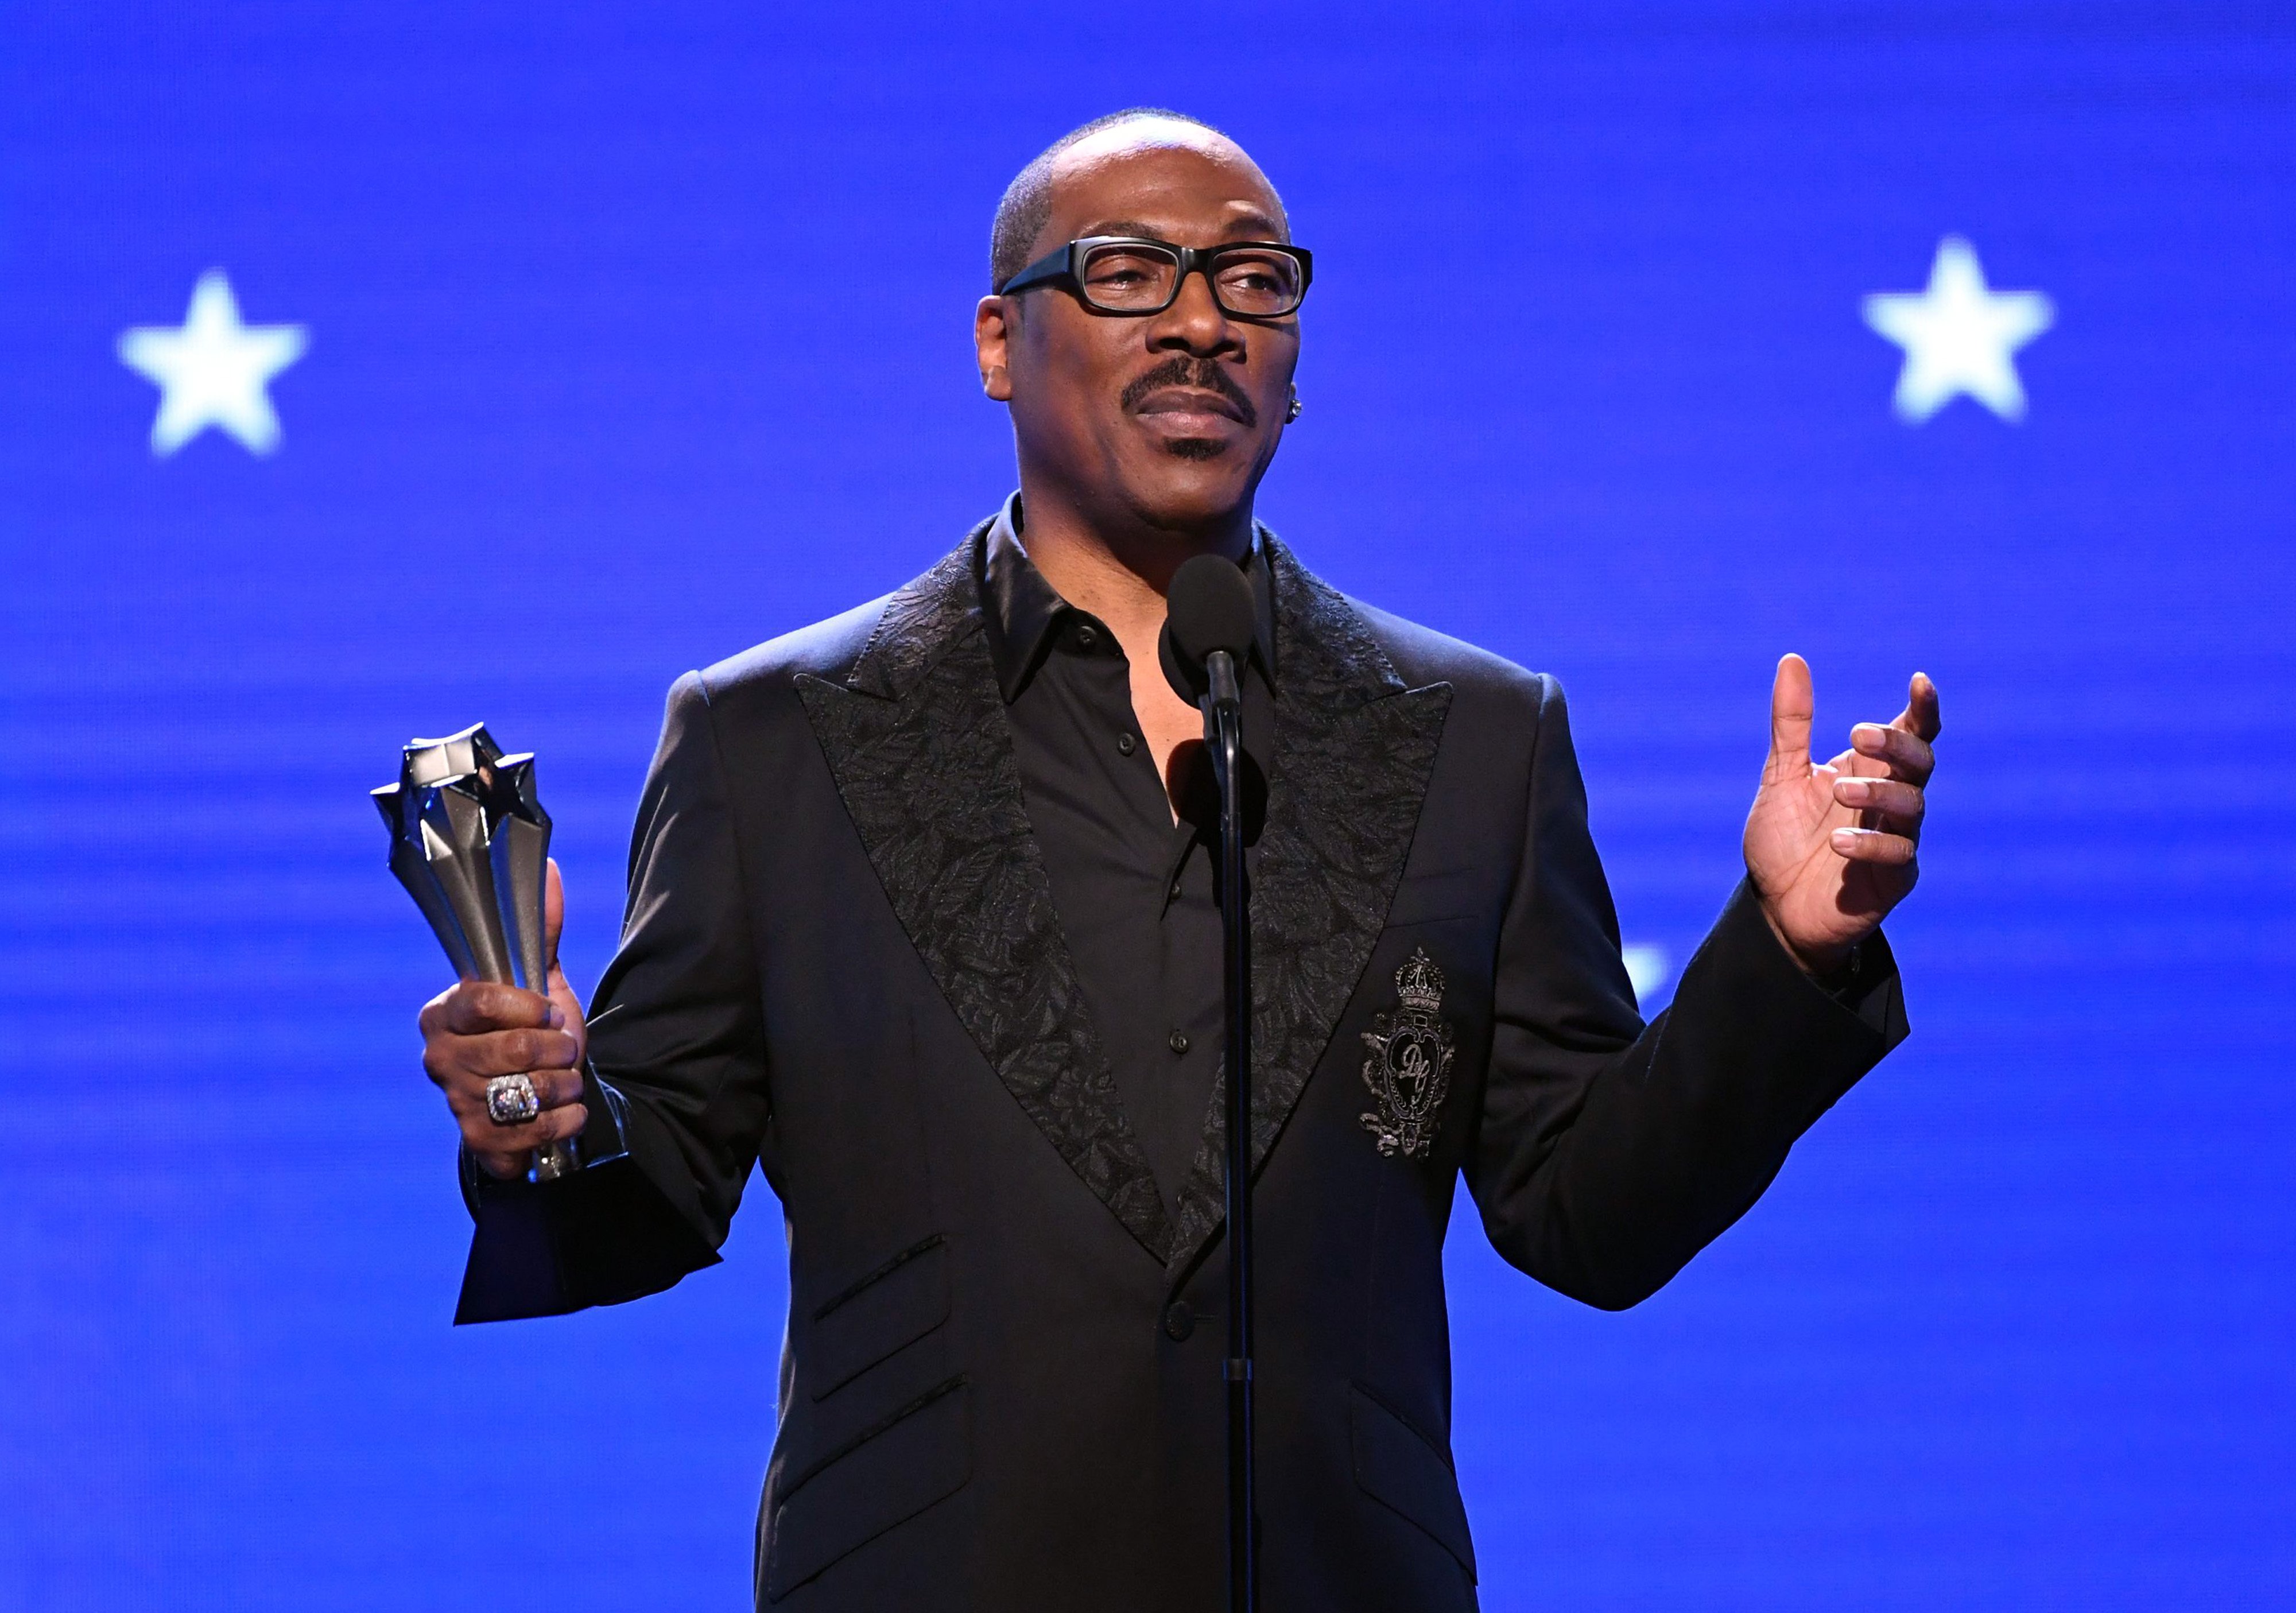 Eddie Murphy accepts the Lifetime Achievement Award onstage during the 25th Annual Critics' Choice Awards at Barker Hangar on January 12, 2020. | Photo: Getty Images.